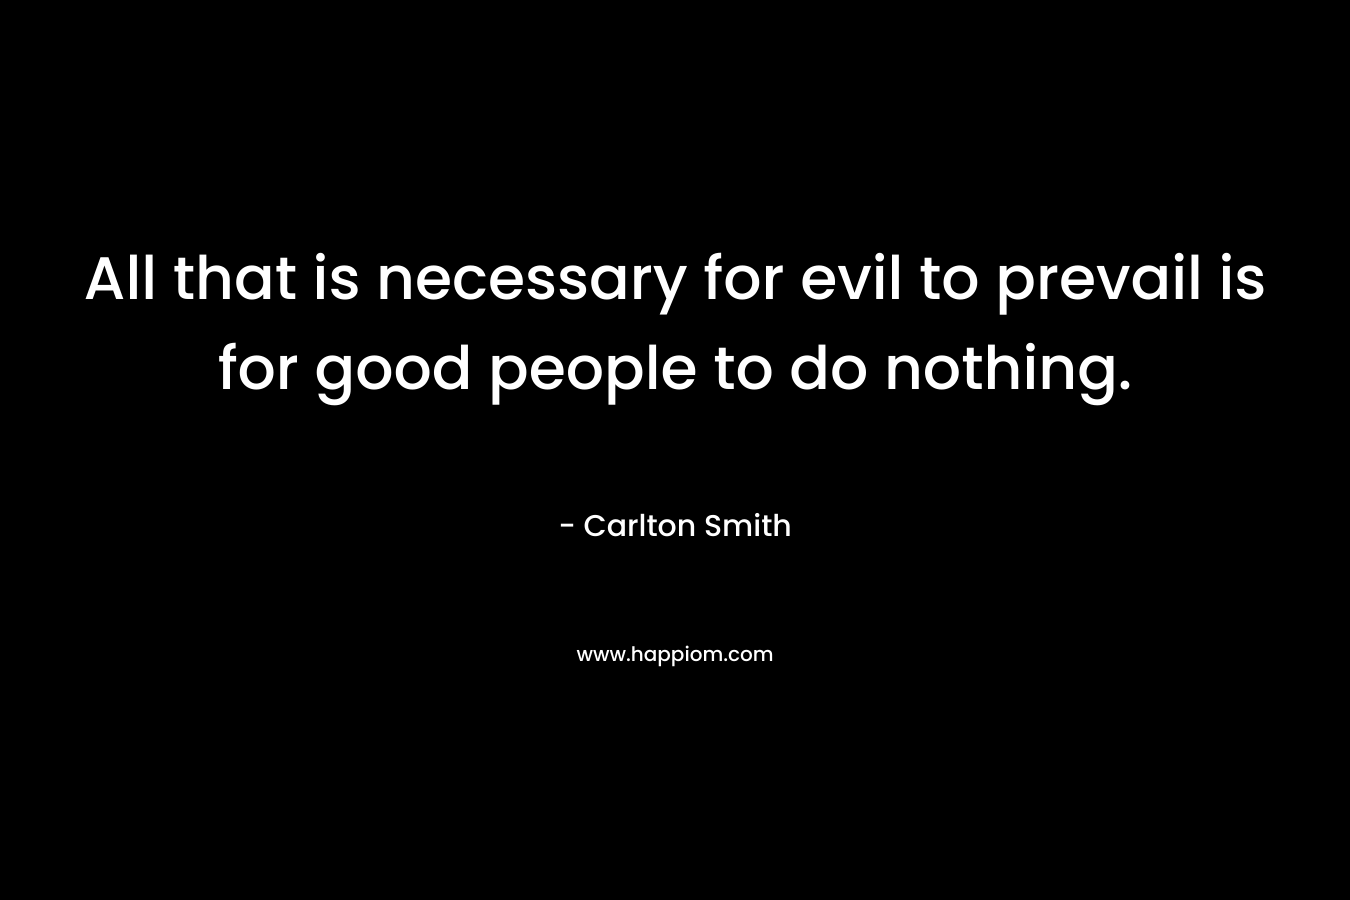 All that is necessary for evil to prevail is for good people to do nothing. – Carlton Smith